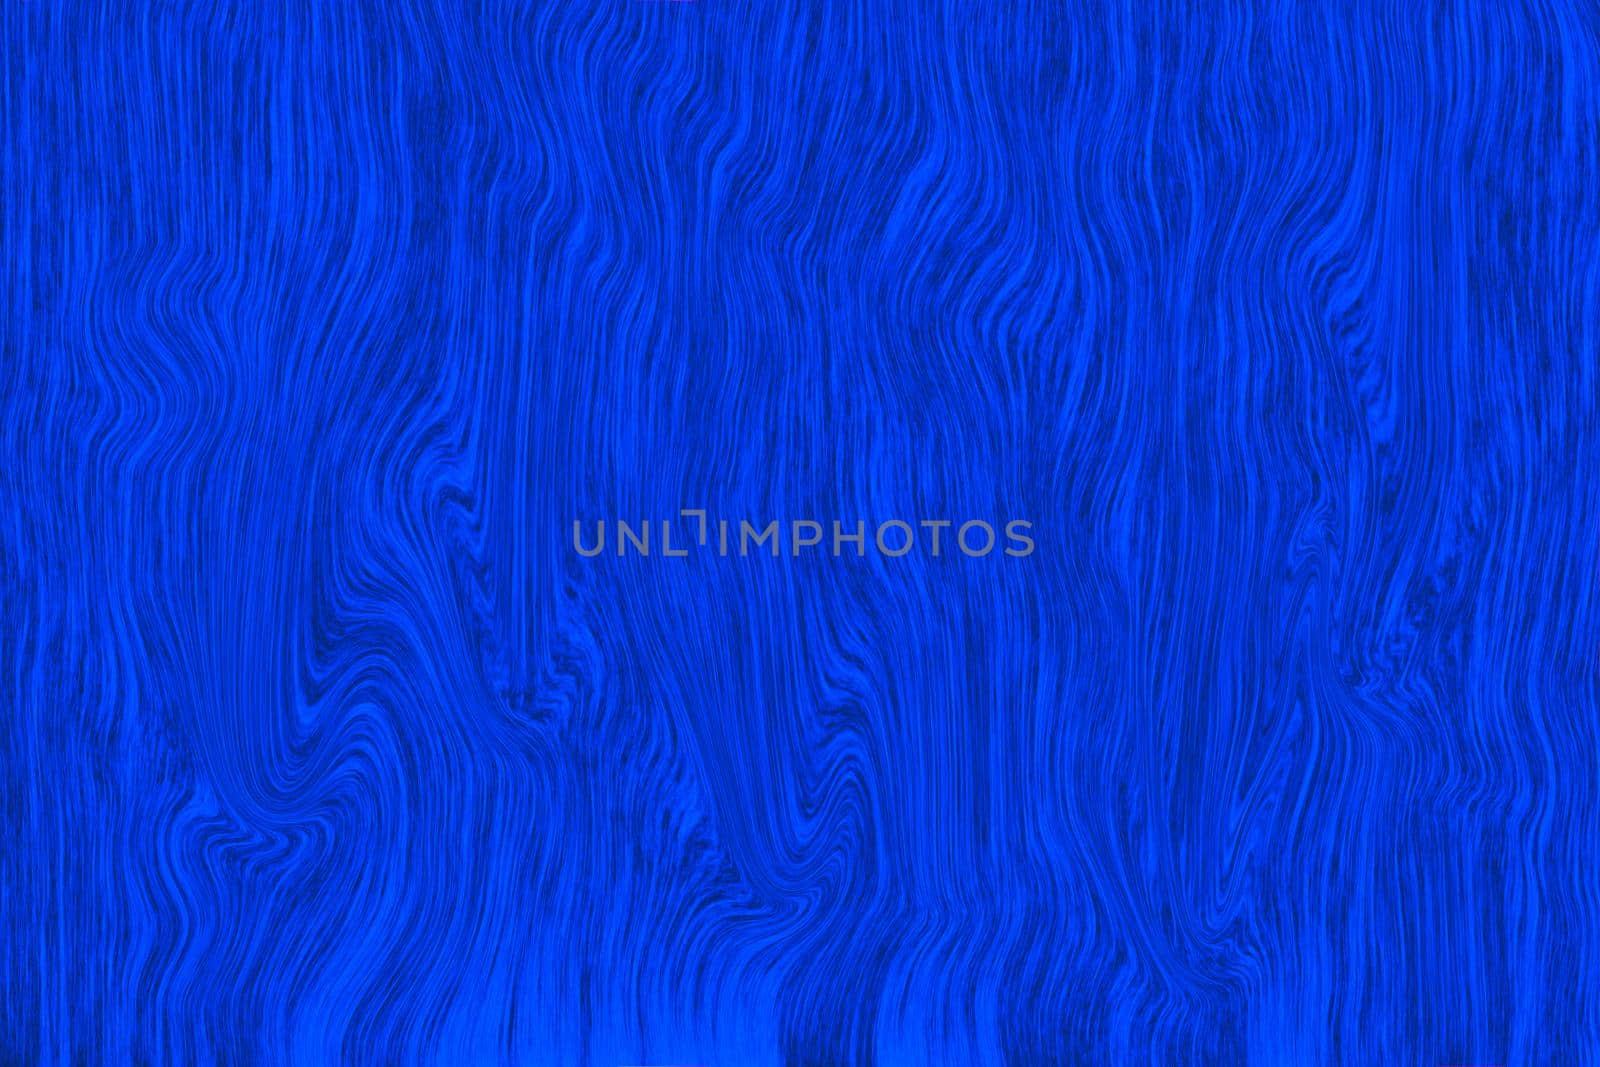 abstract blue and black line same wood texture surface art interior background